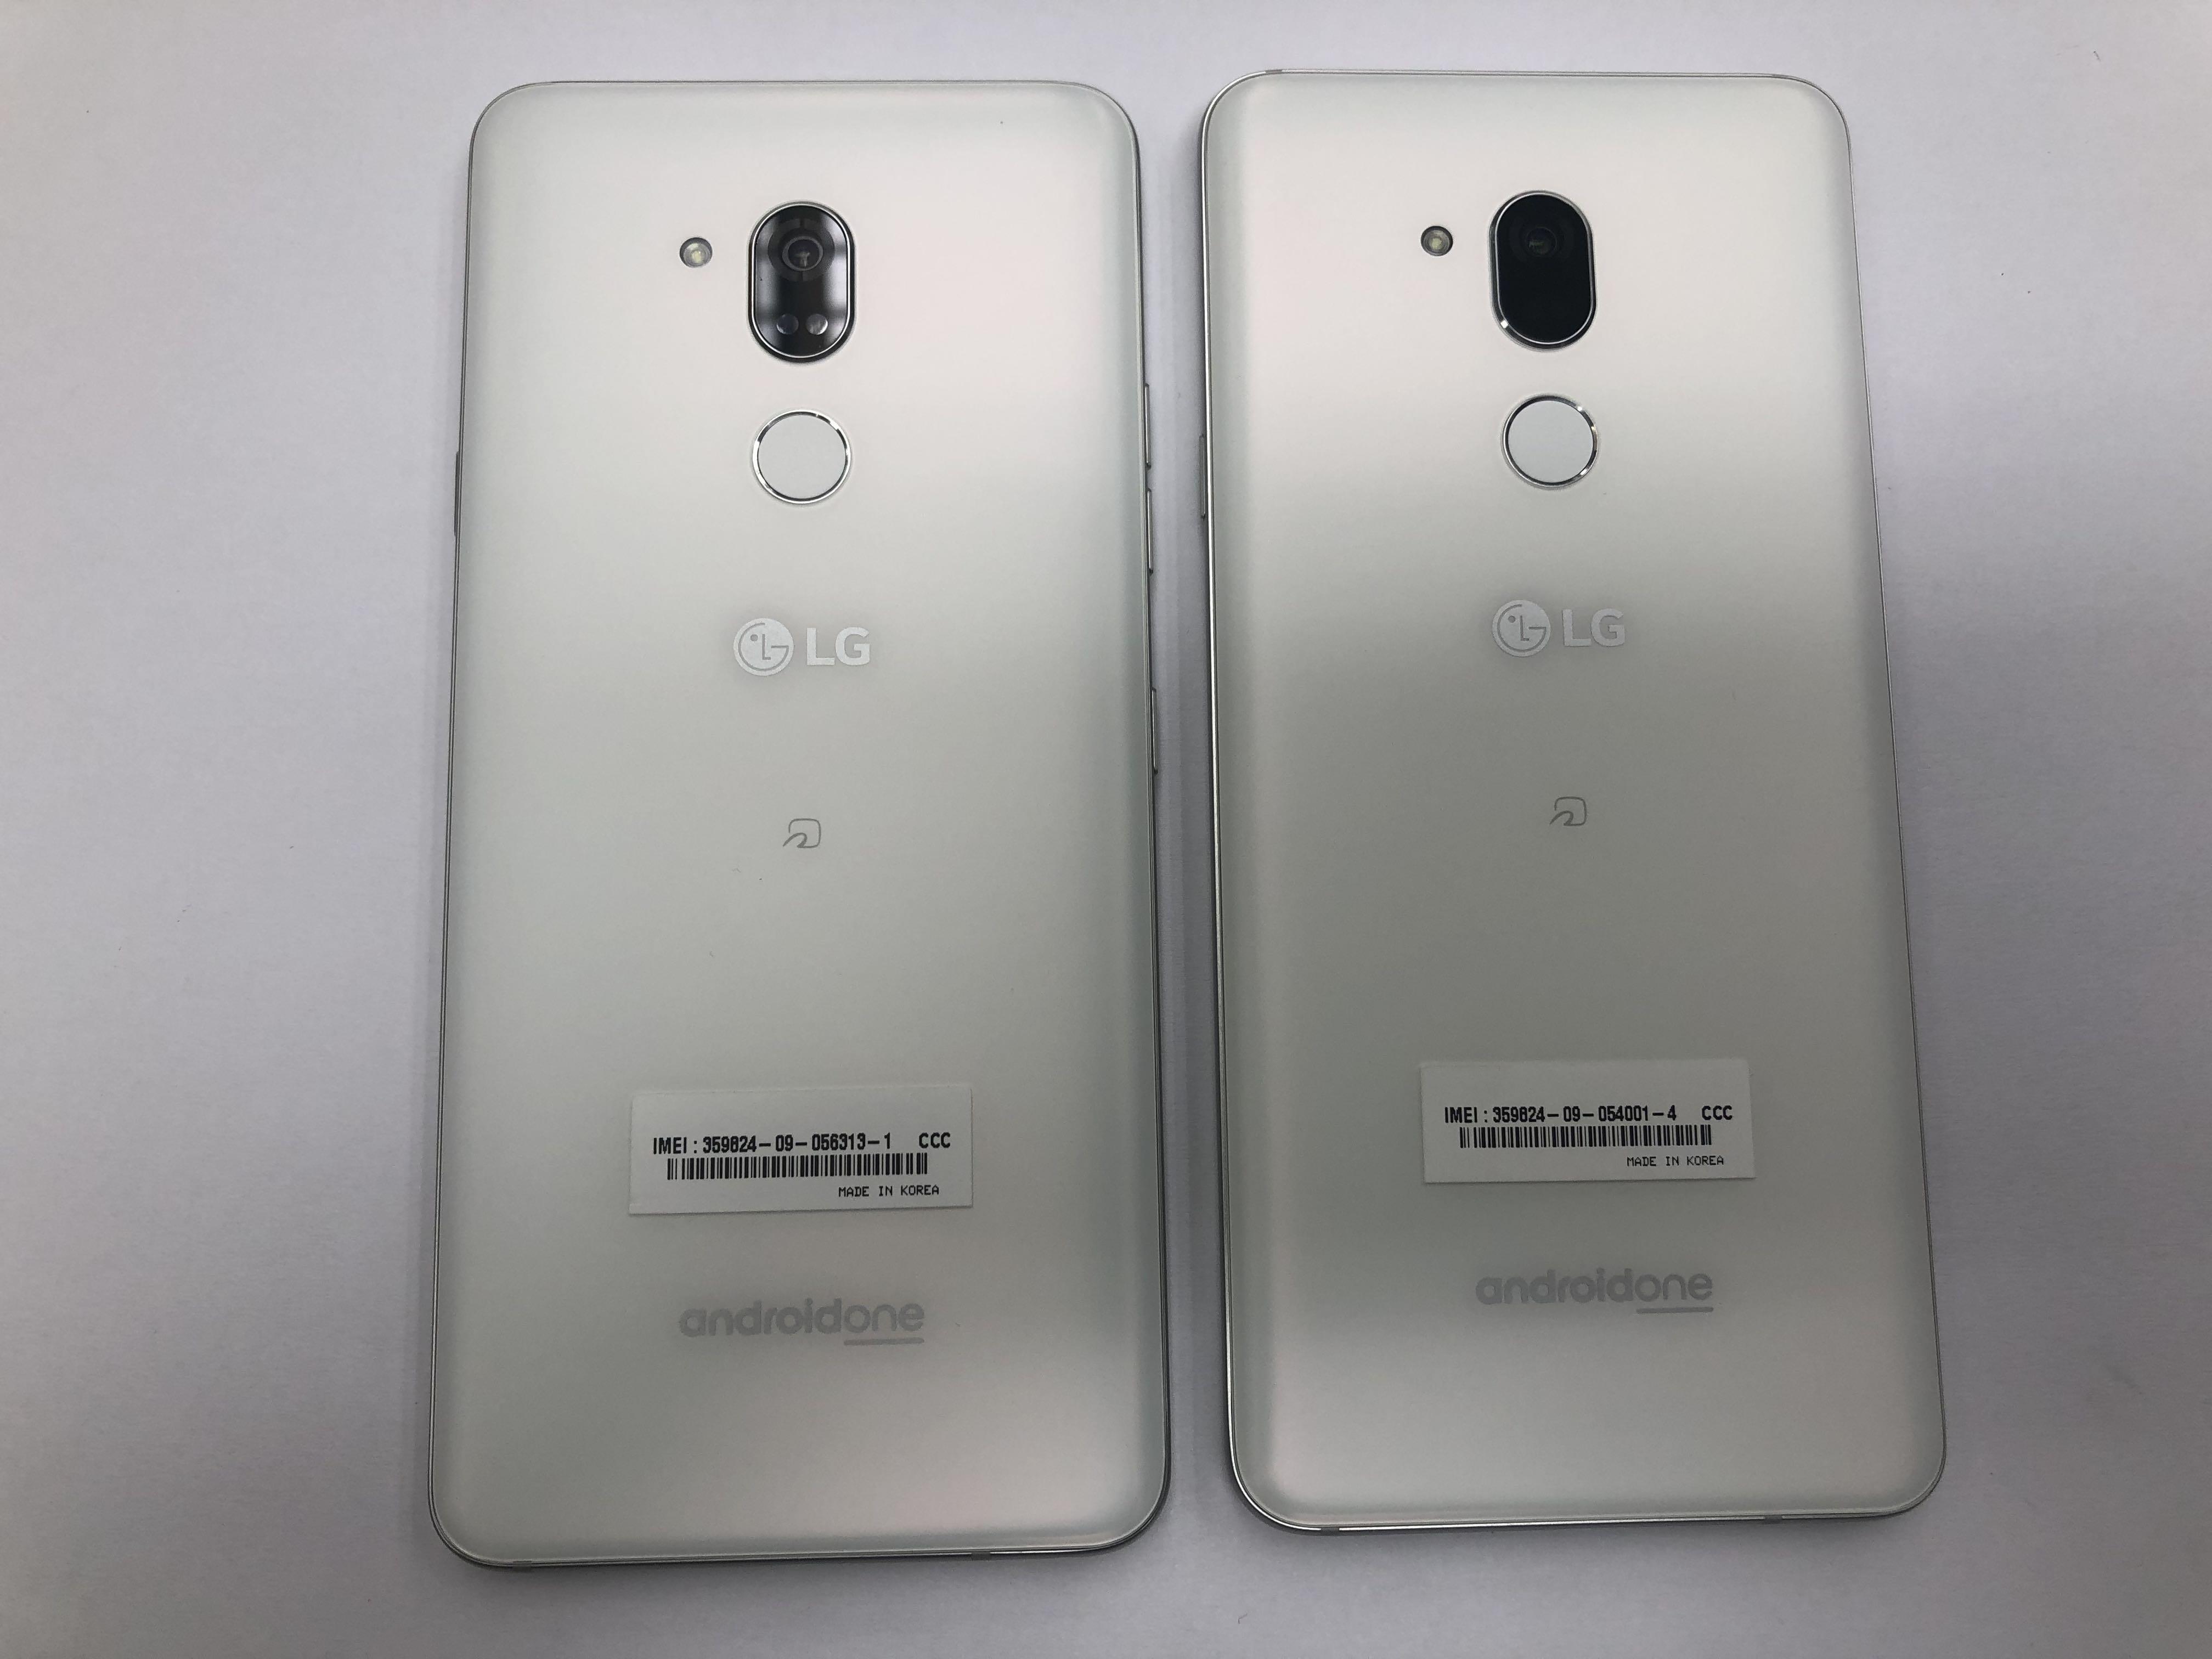 LG Android One X5 32GB ニューモロッカンブルー X5-LG ...